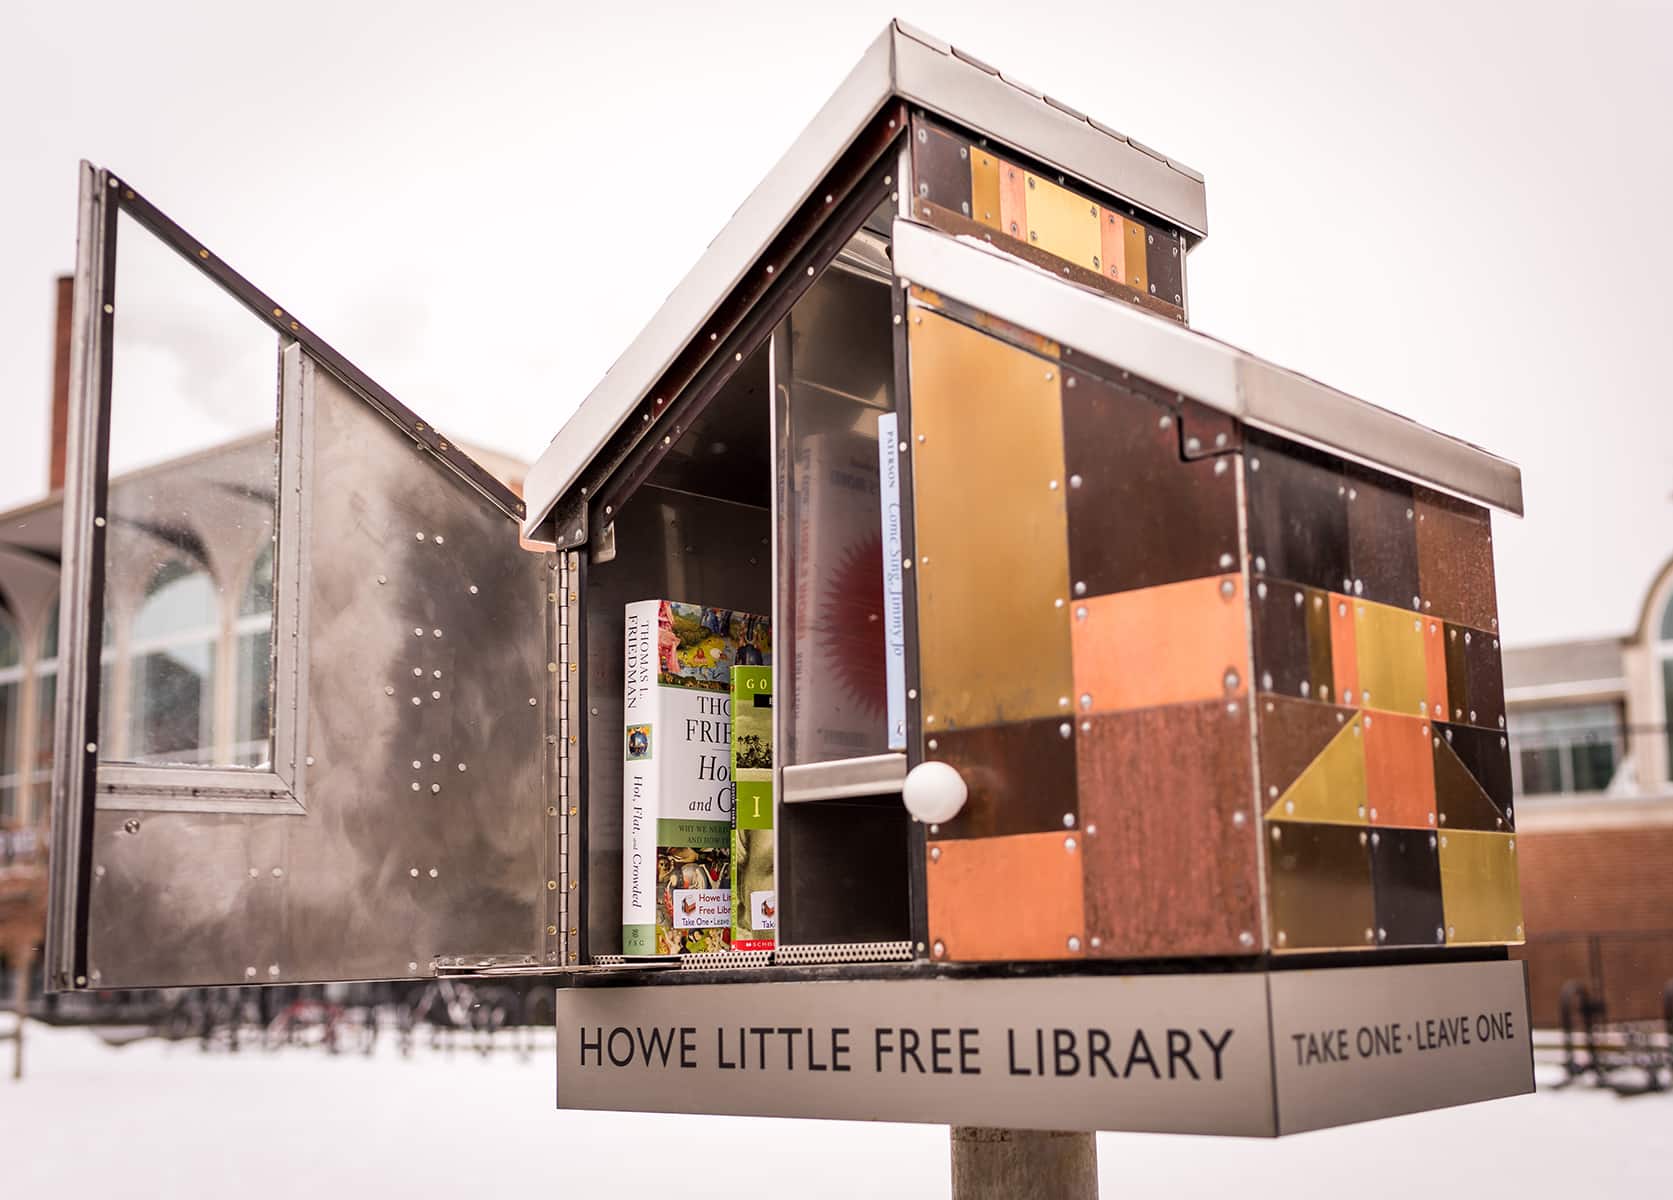 Howe Little Free Library encourages readers to leave or take a book. 